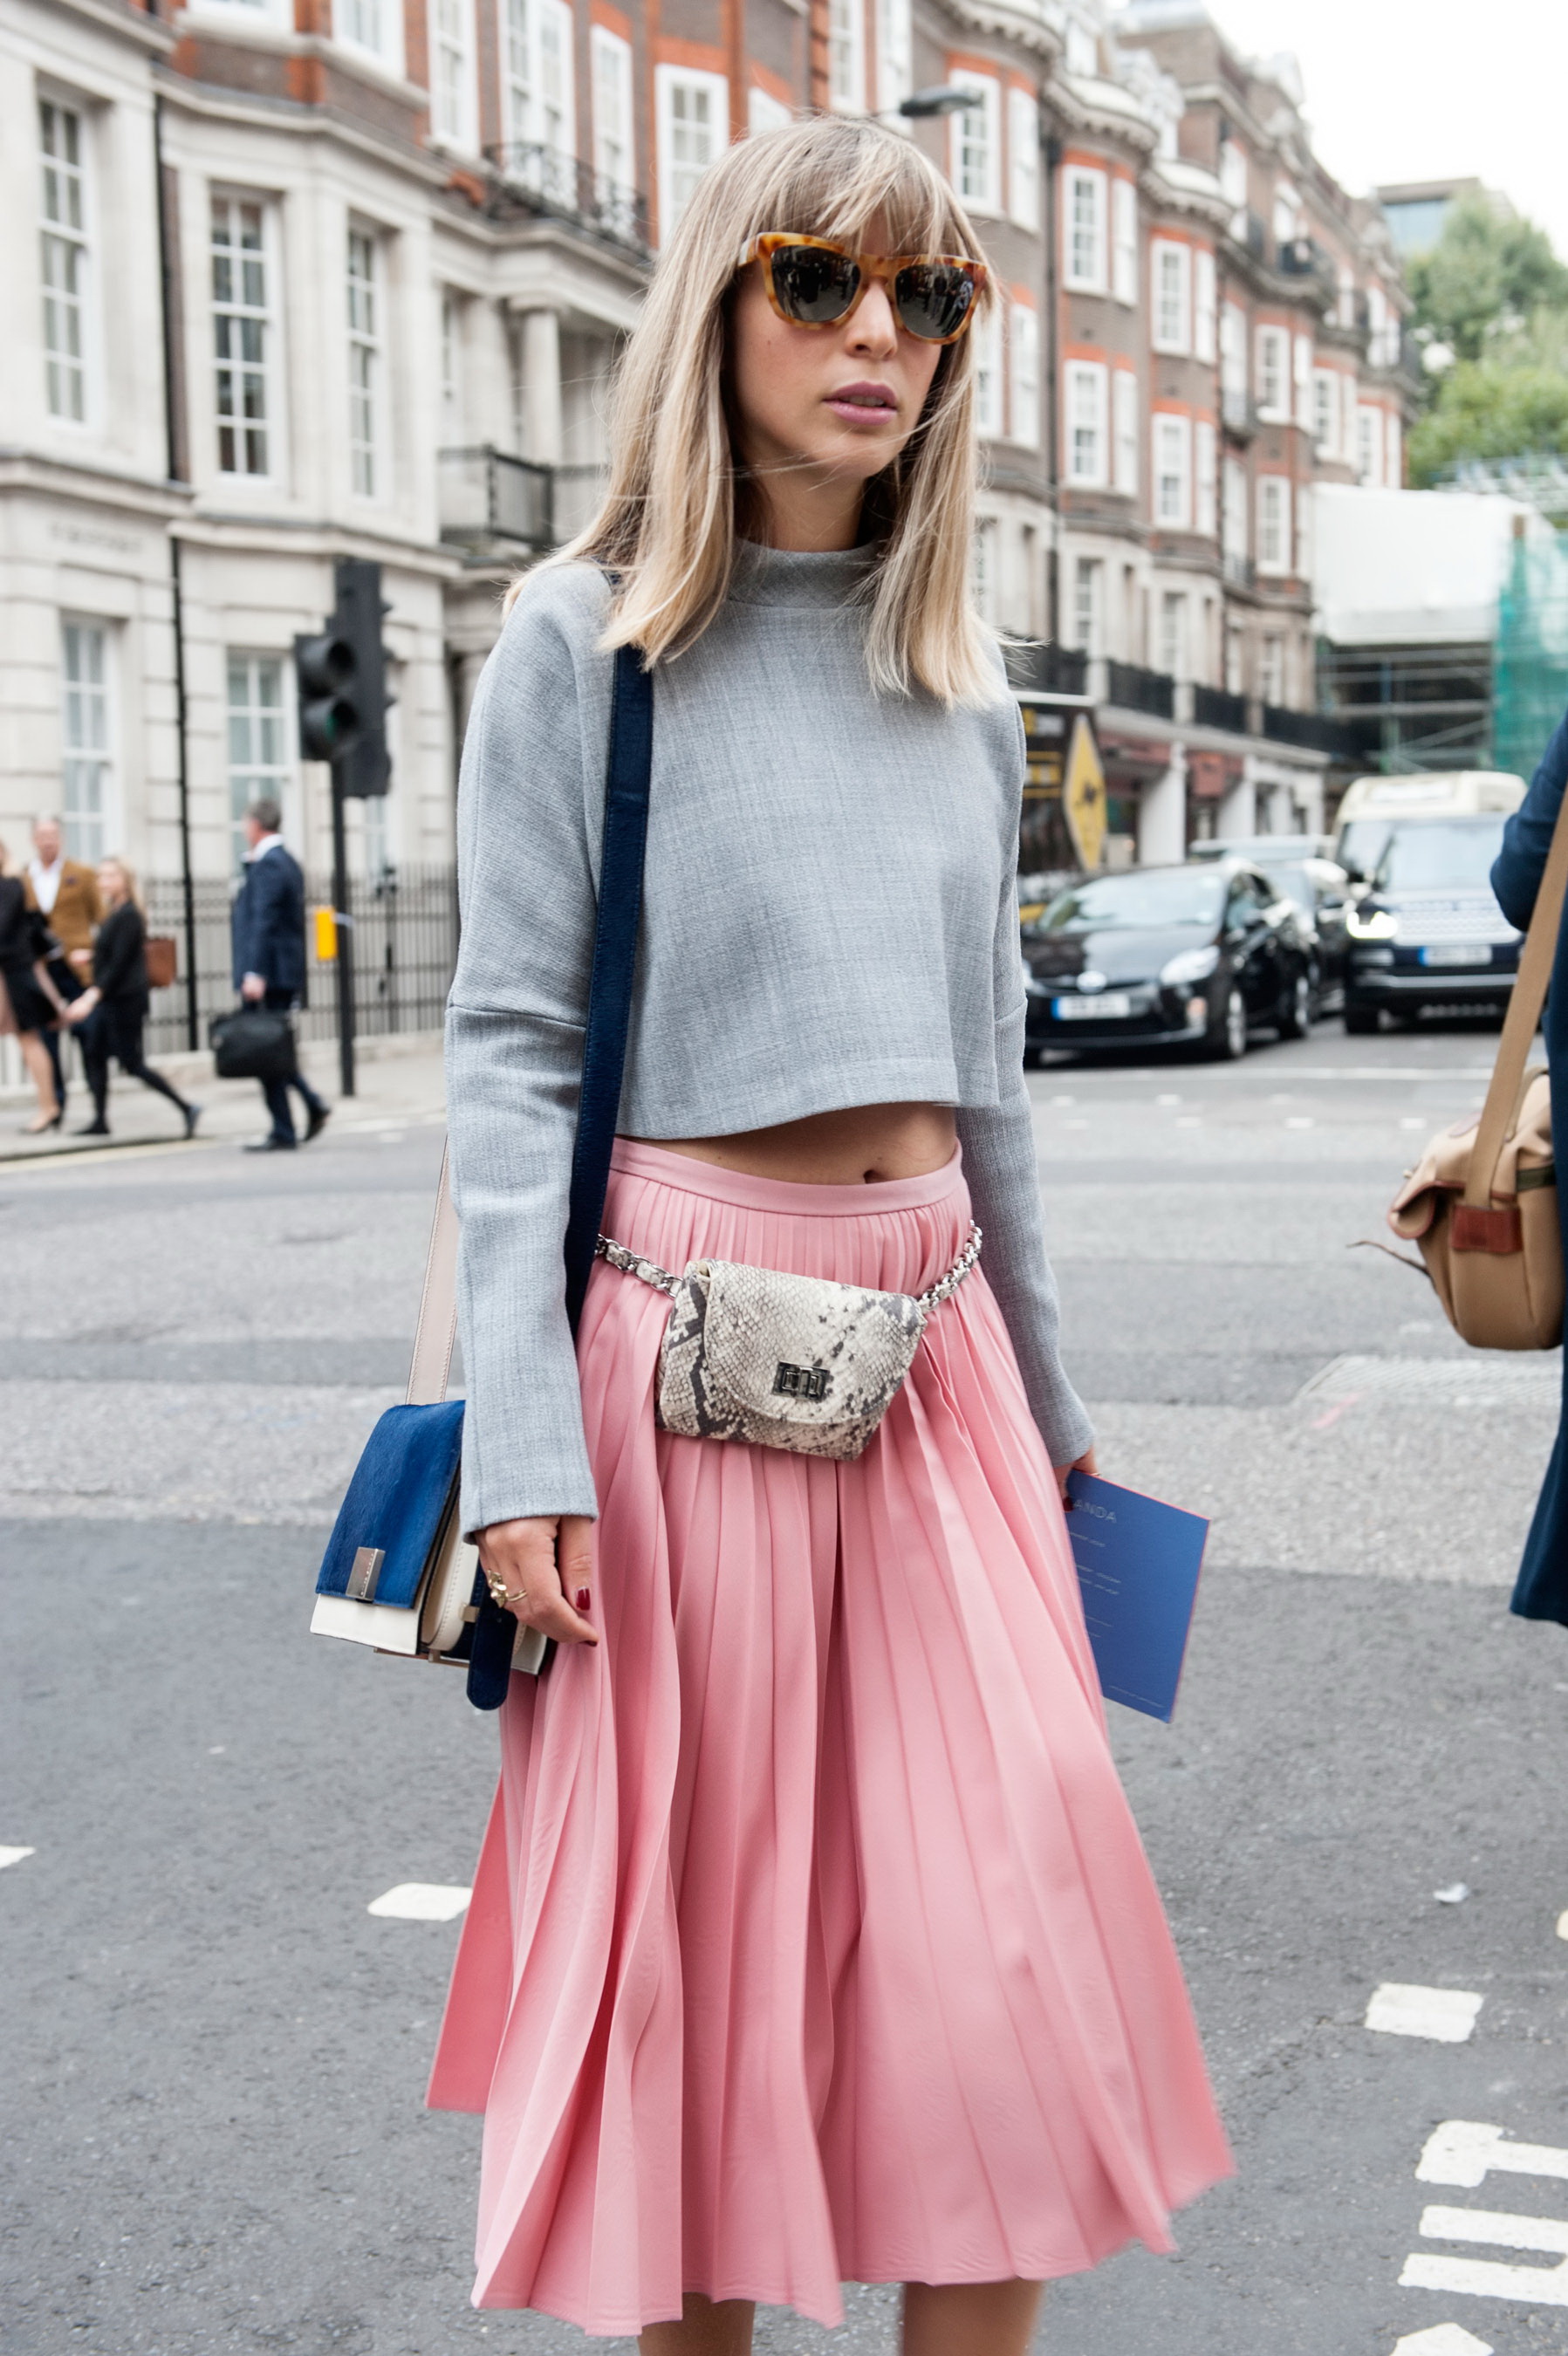 how to wear pleated skirts outfit ideas melonkiss 11